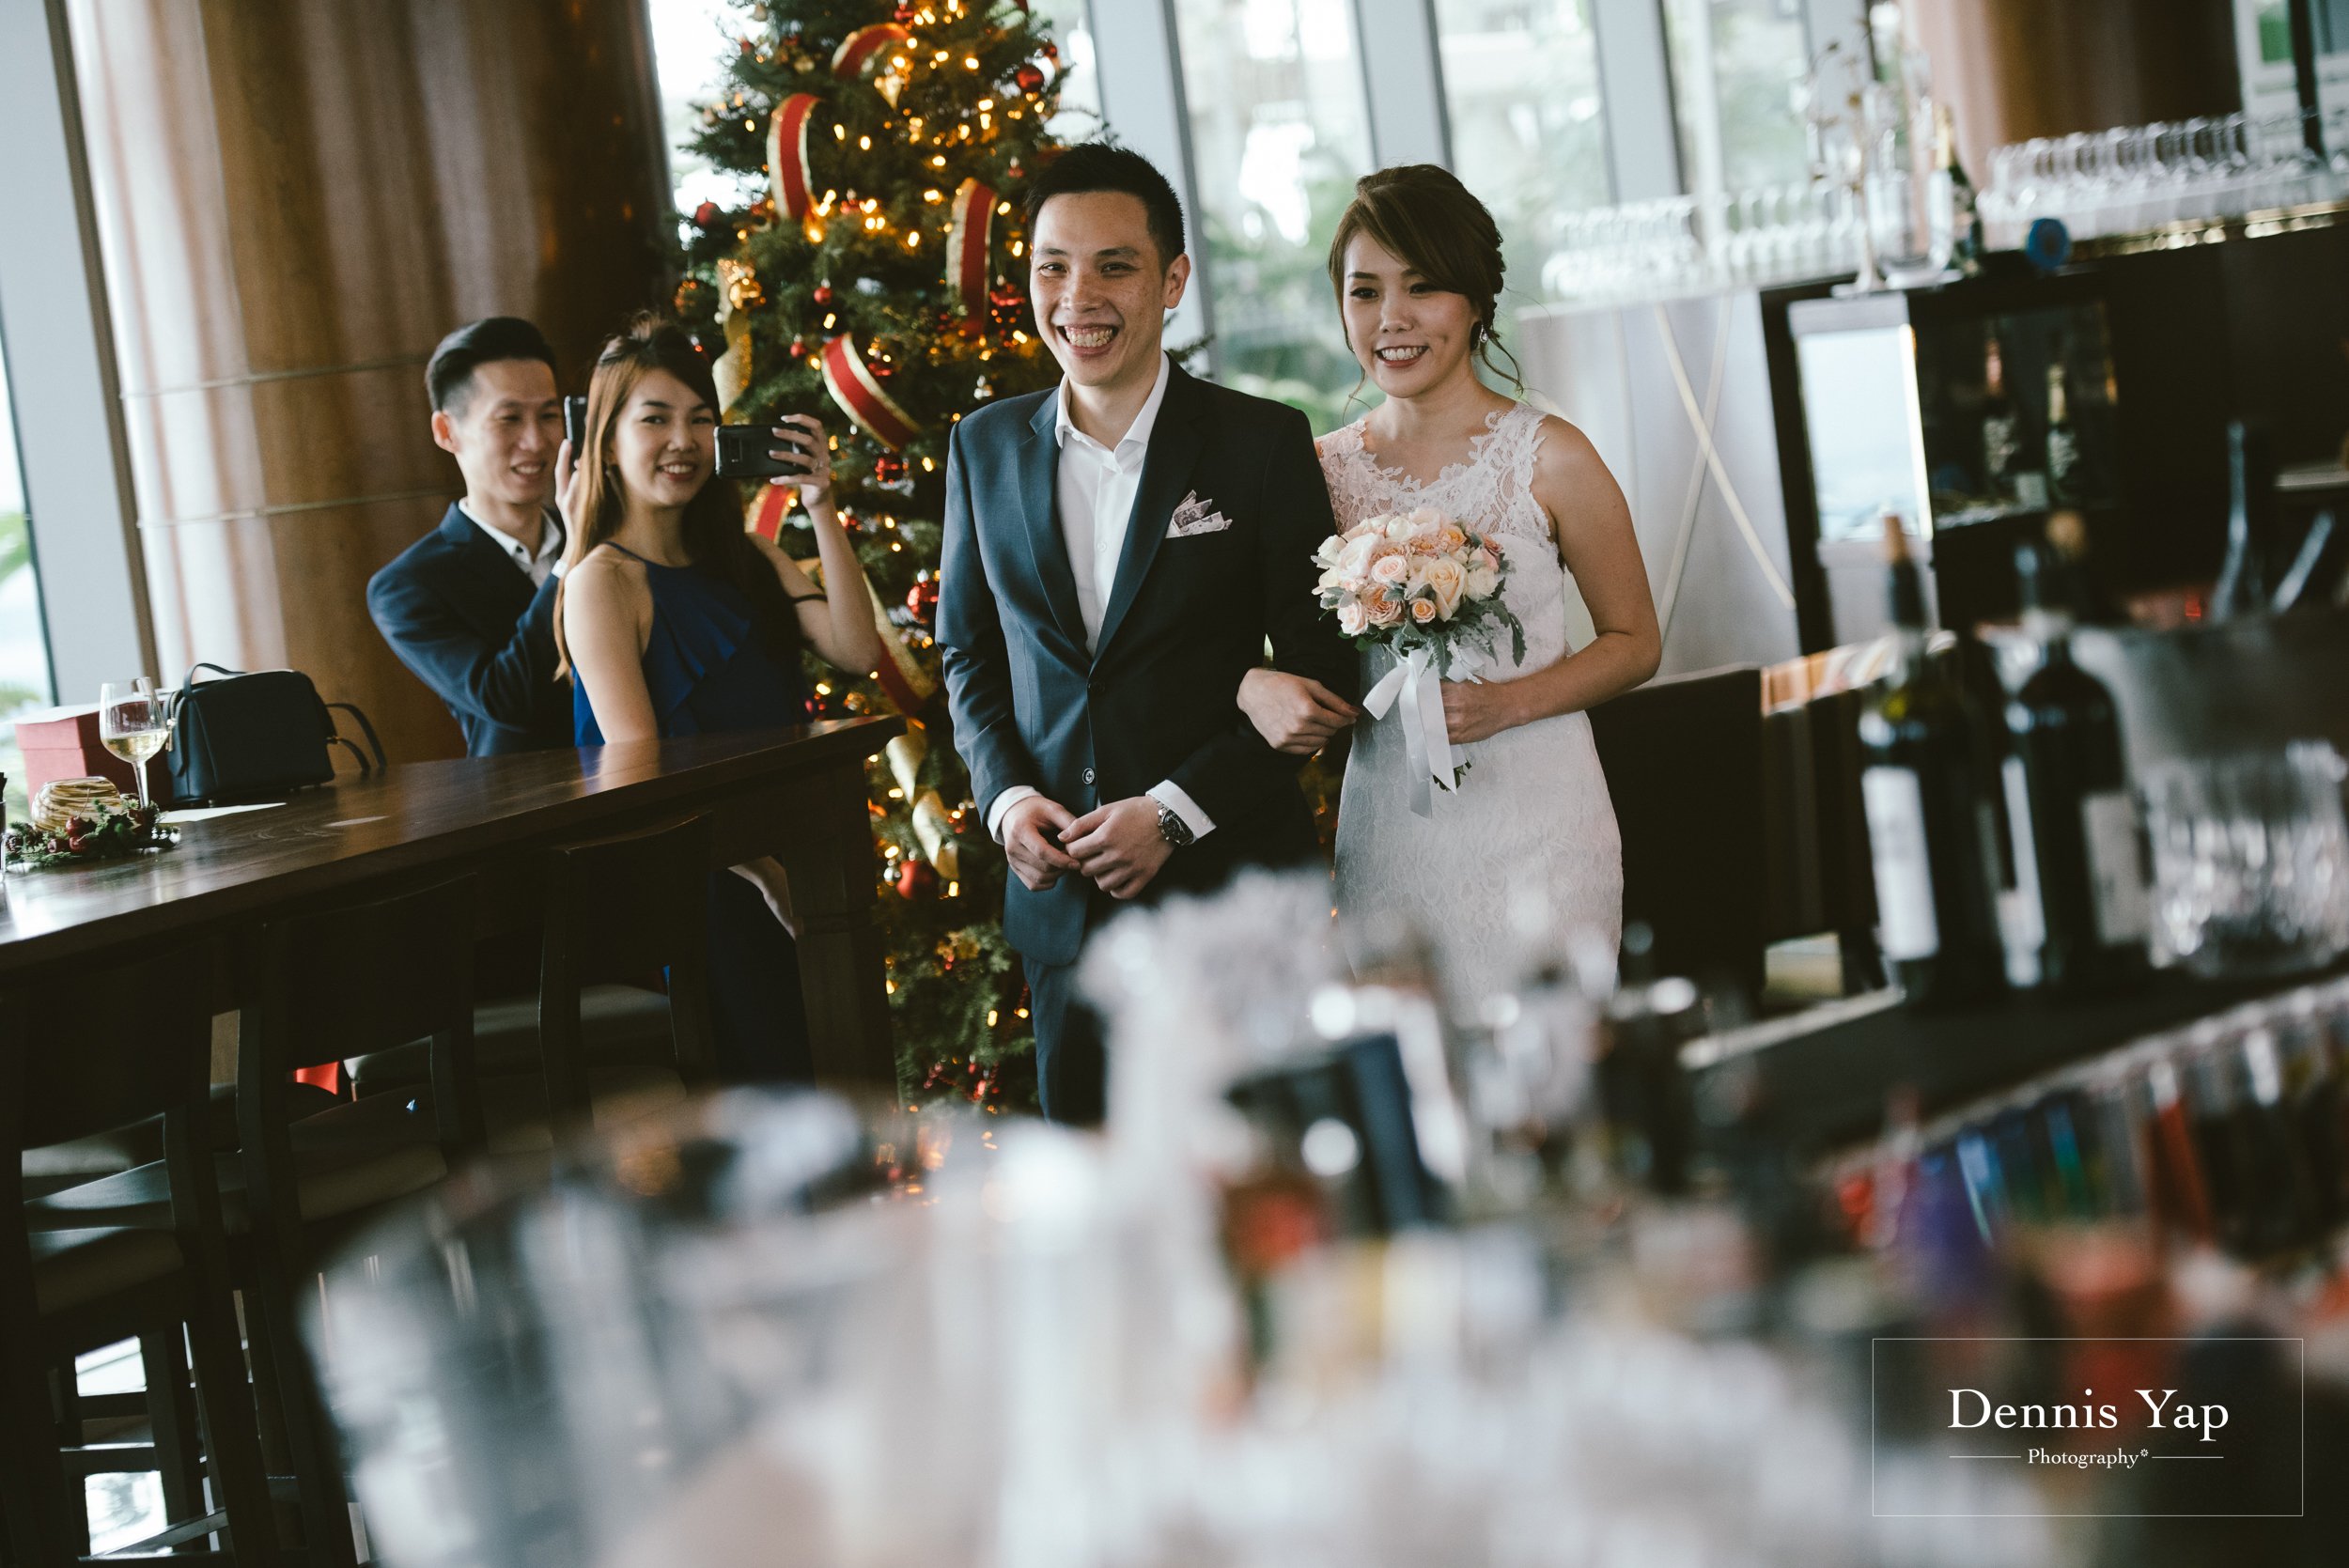 clarence kerlyn registration of marriage in zafferano singapore dennis yap photography malaysia top wedding photographer-8.jpg